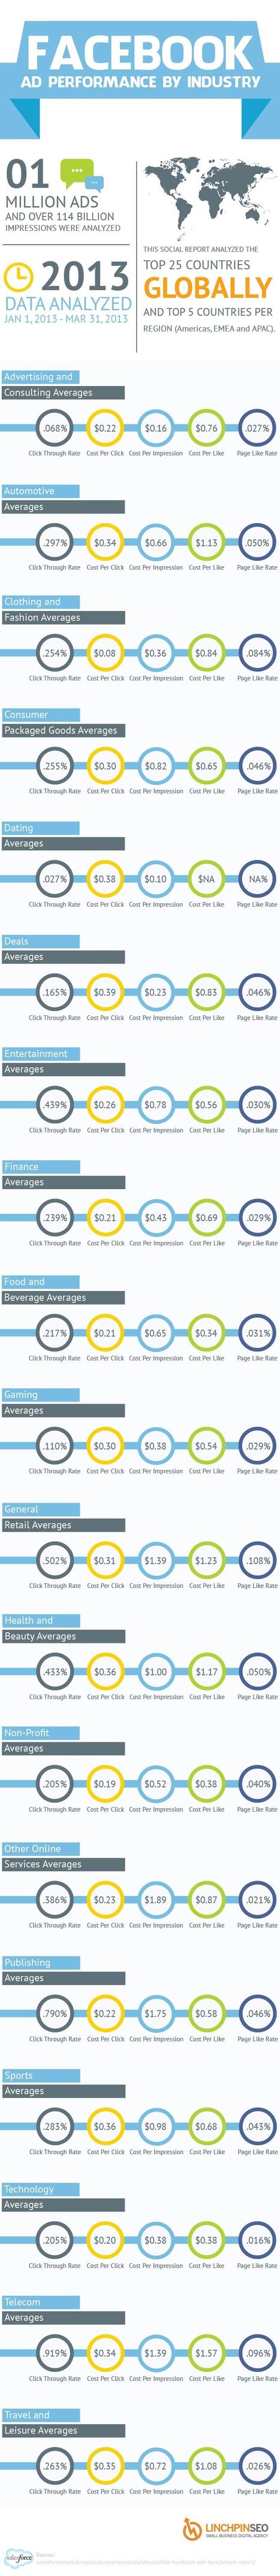 Are Facebook Ads Worth The $? Telecom and Fashion Rule [Infographic] | Latest Social Media News | Scoop.it